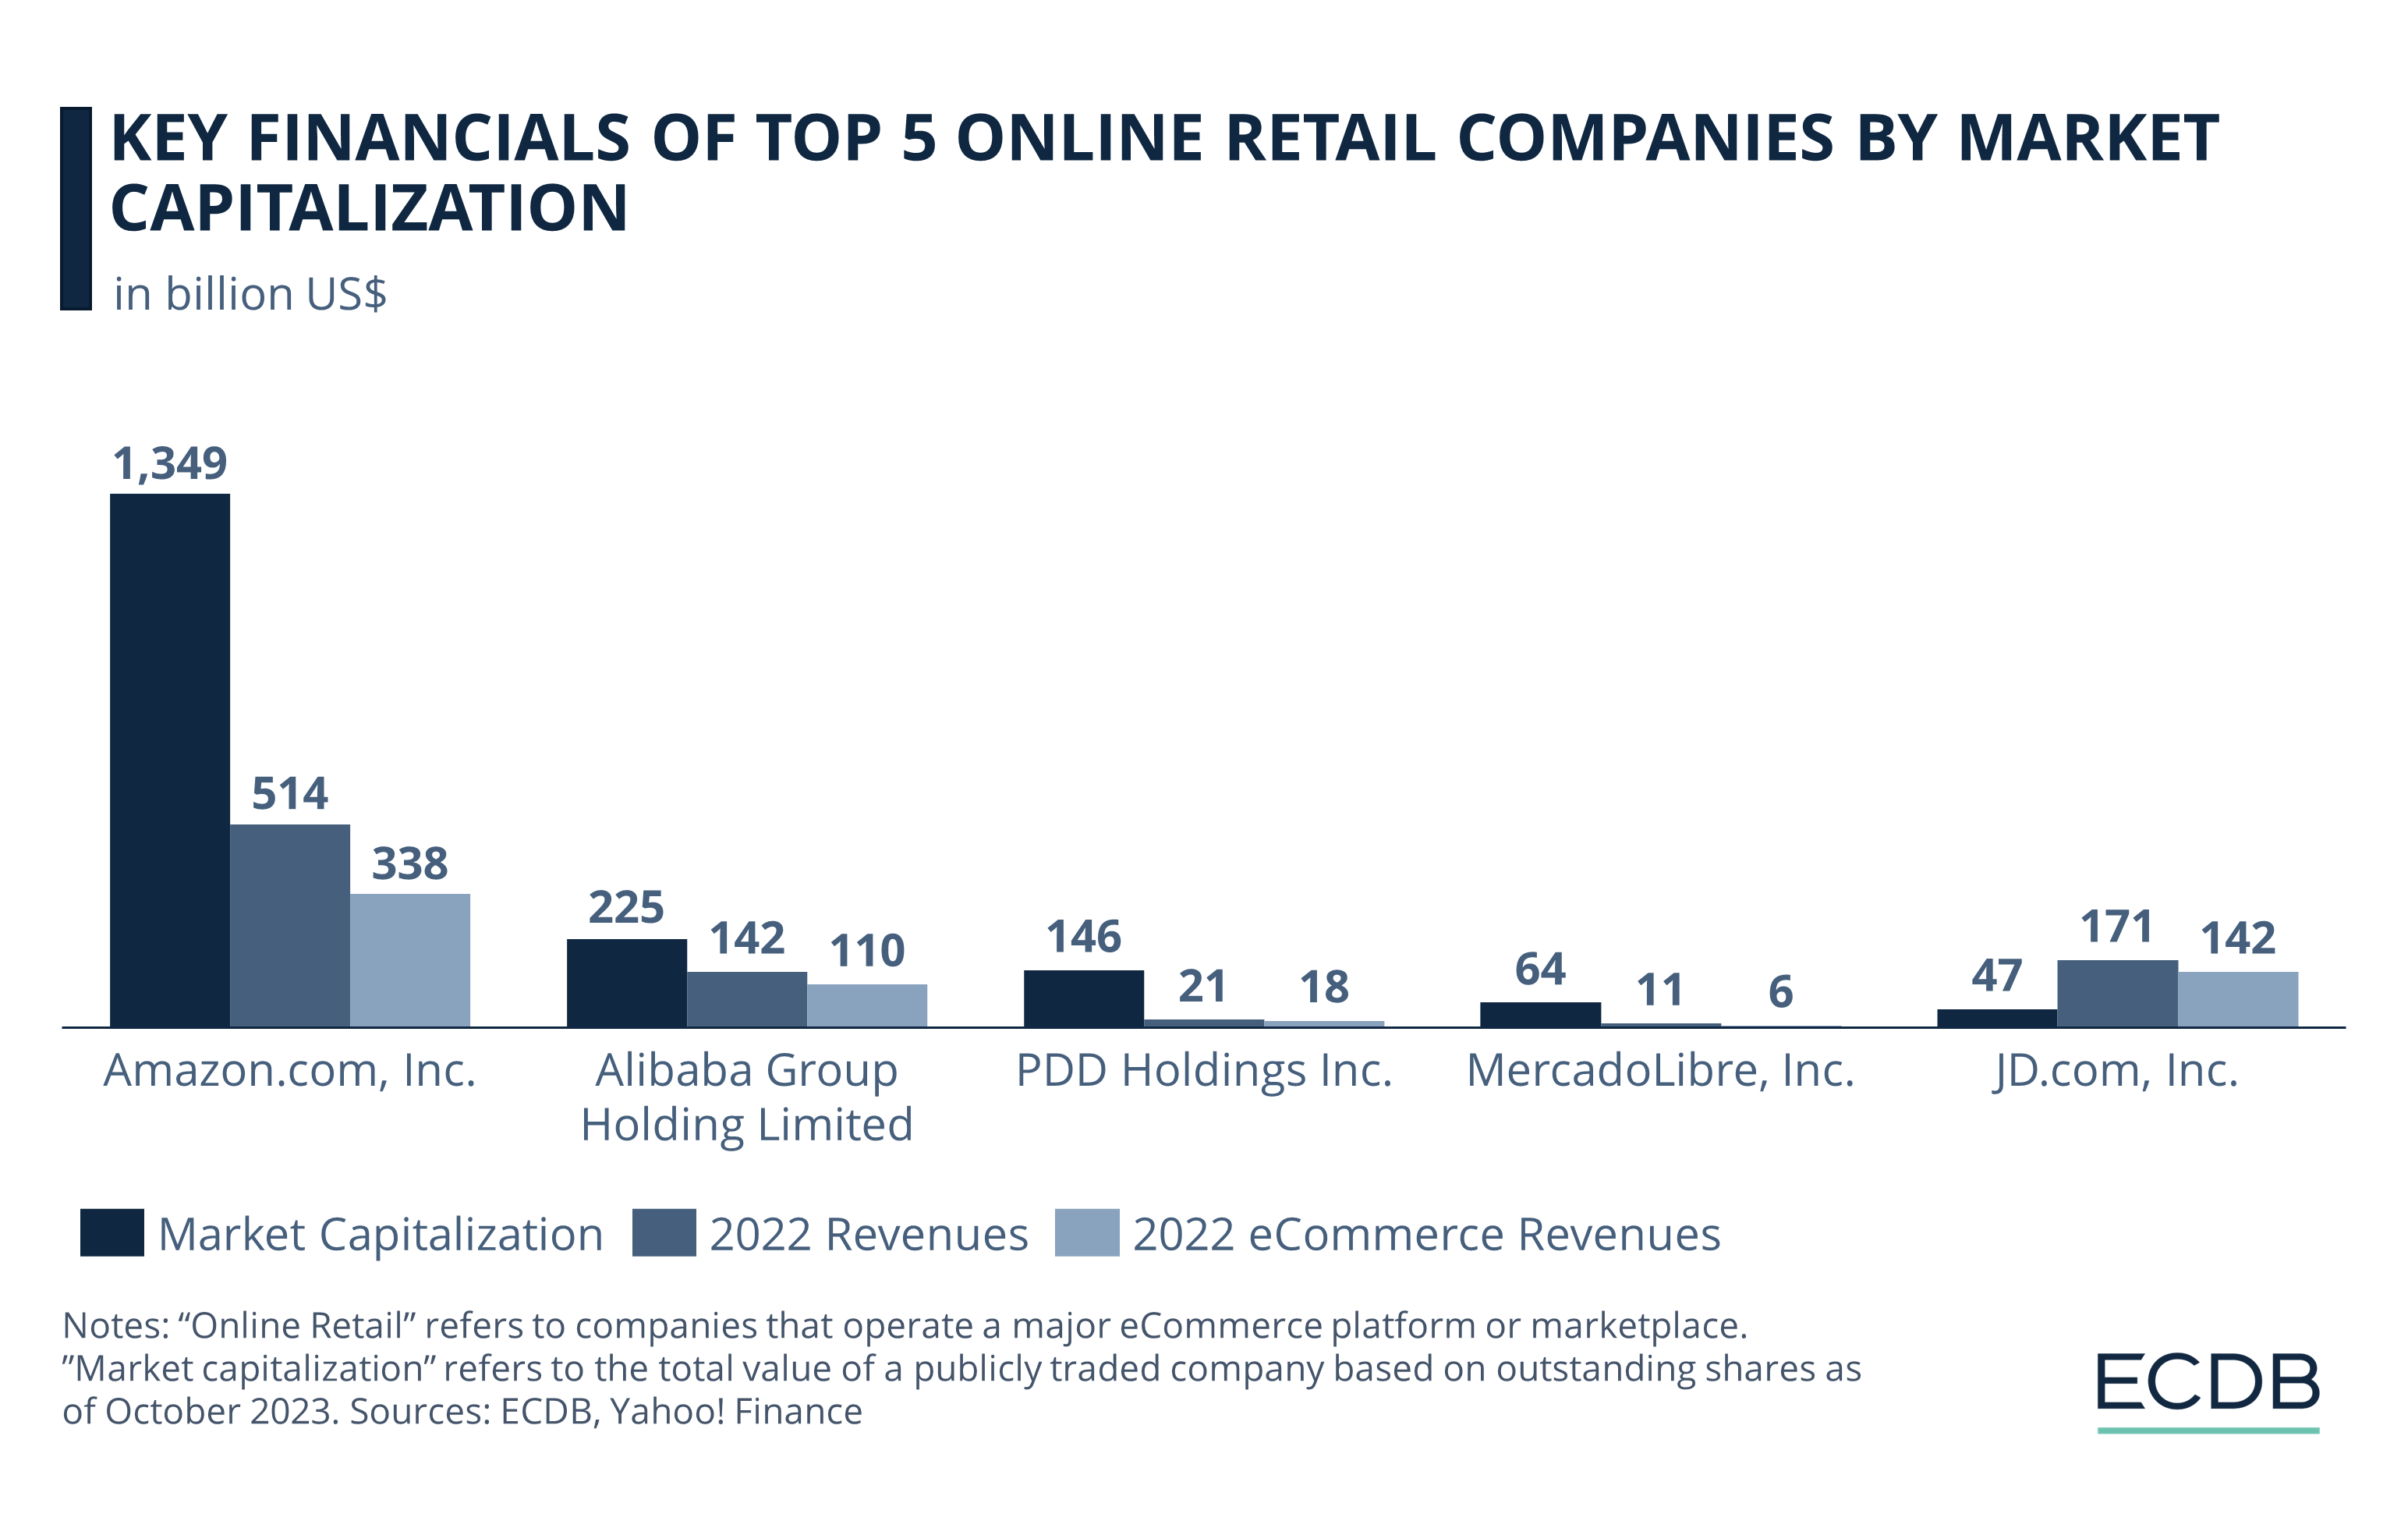 Key Financials of Top 5 Online Retail Companies by Market Capitalization